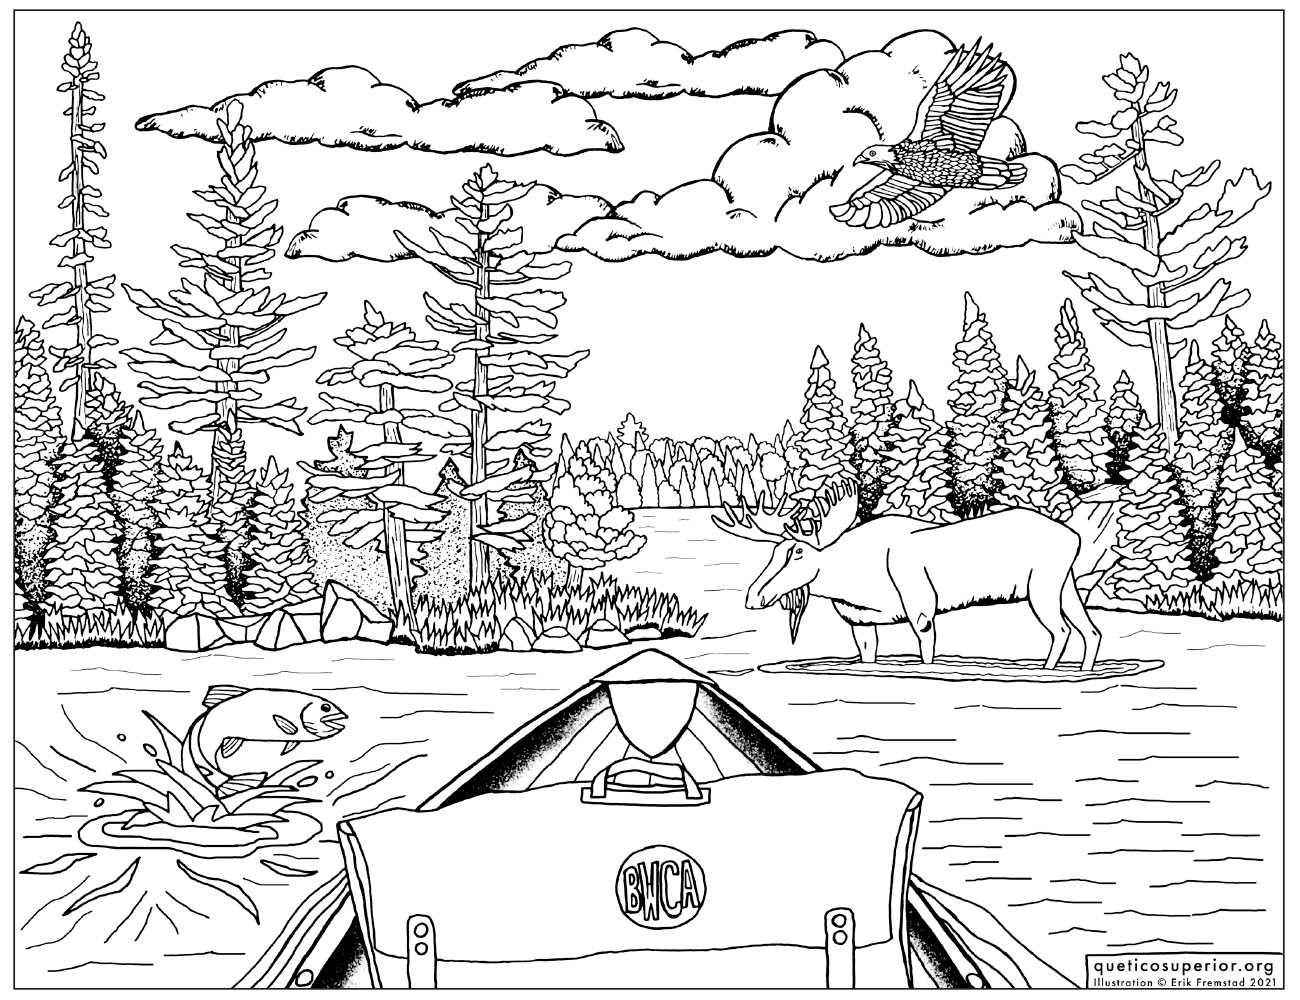 Coloring Page: Caribou Lake, Boundary Waters Canoe Area Wilderness